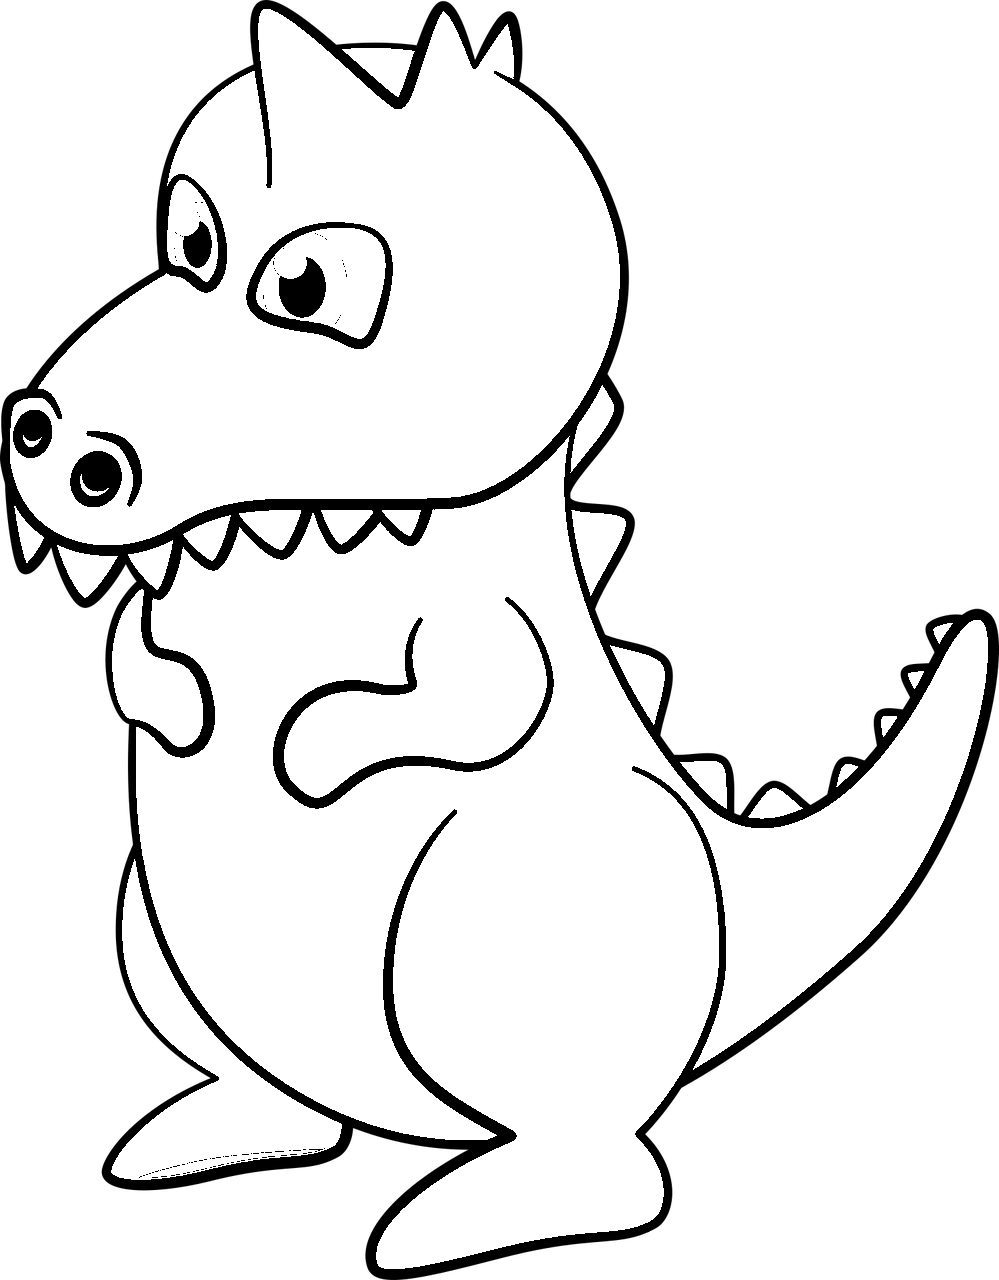 Cartoon style lizard coloring page for kids